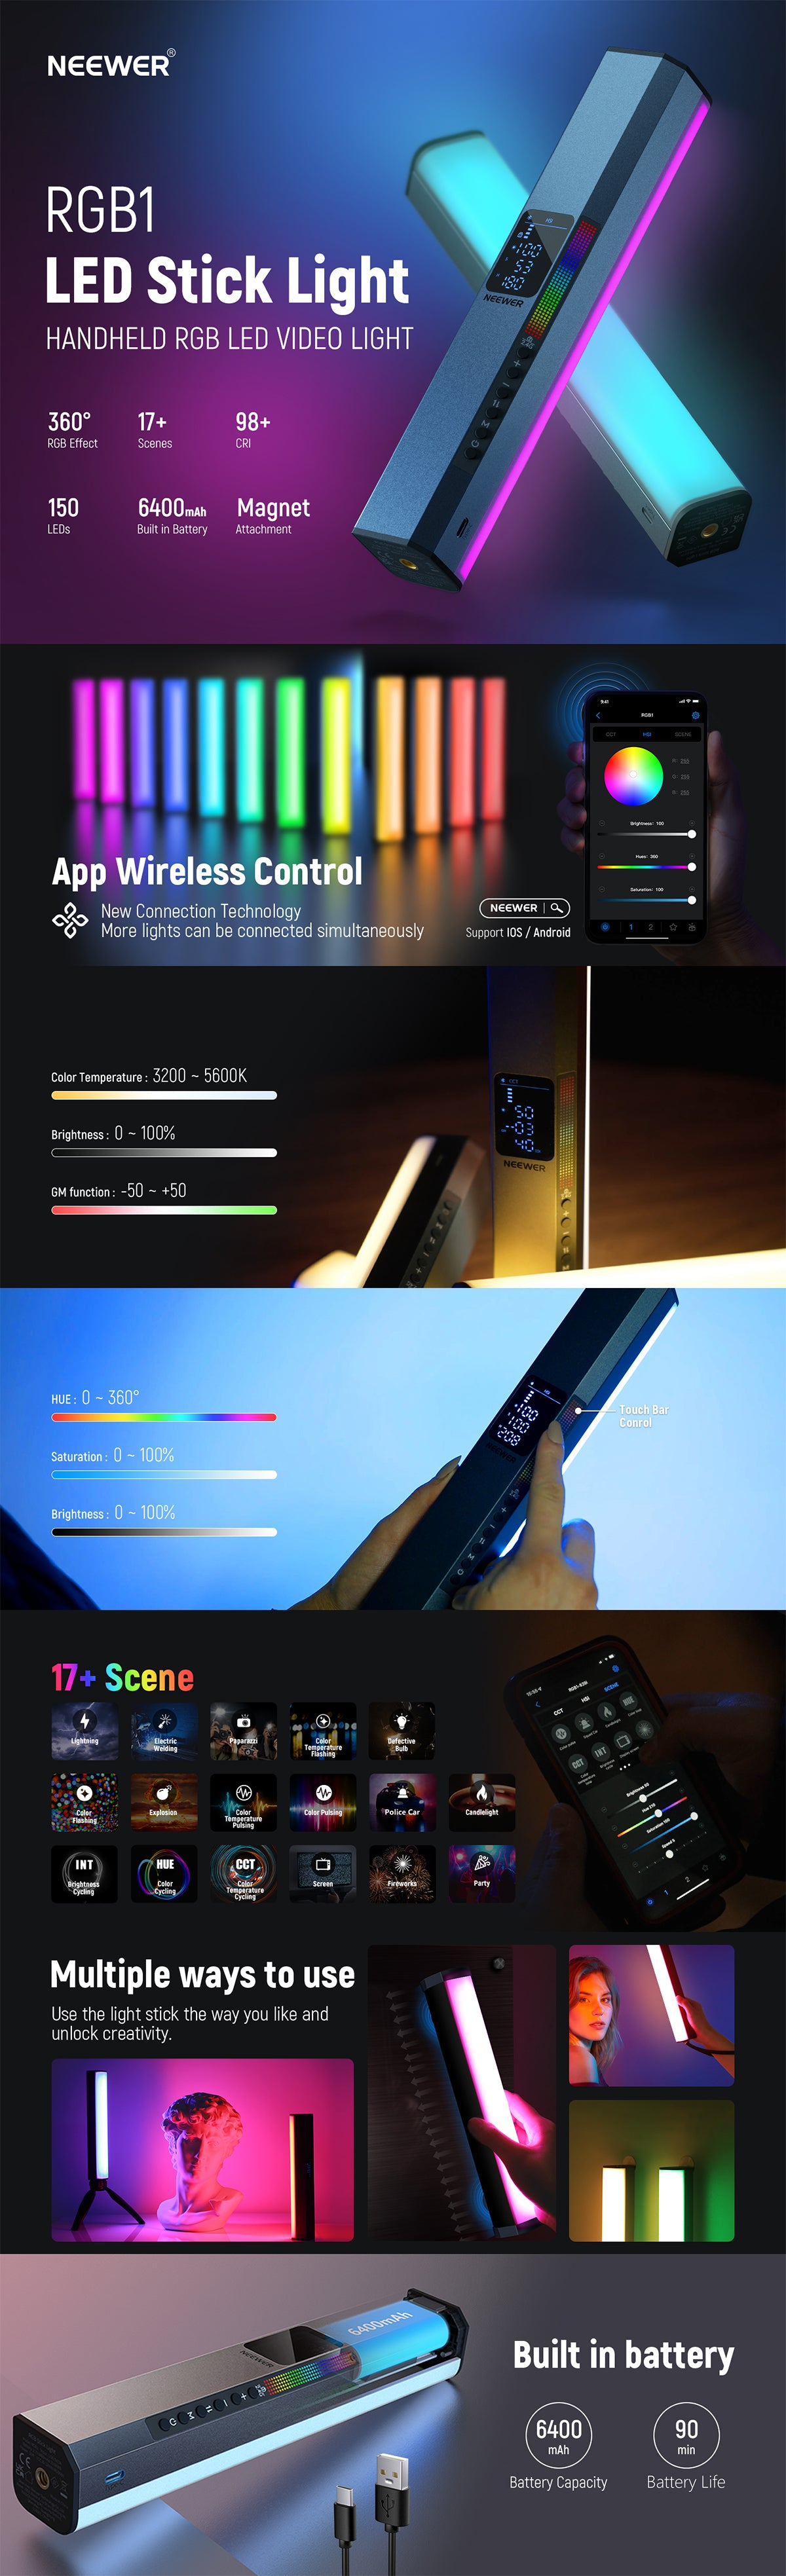 NEEWER RGB LED Video Light Stick, Touch Bar&APP Control, Magnetic Handheld  Photography Lighting Wand, Dimmable 3200K~5600K CRI98+ Full Color LED Light